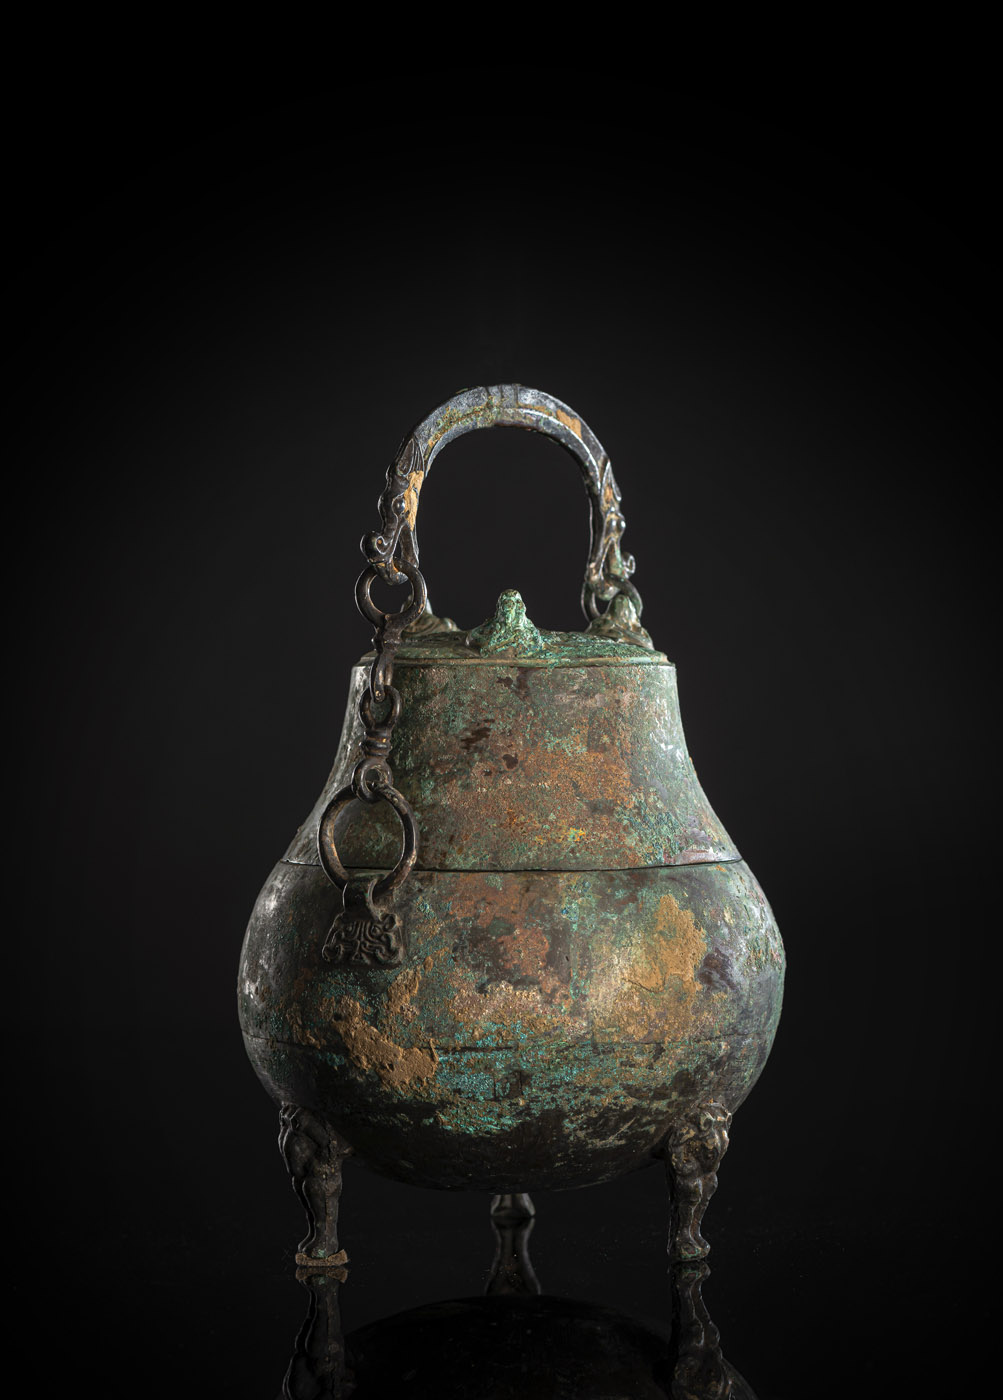 AN ARCHAIC BRONZE TRIPOD VESSEL AND COVER, DILIANG HU